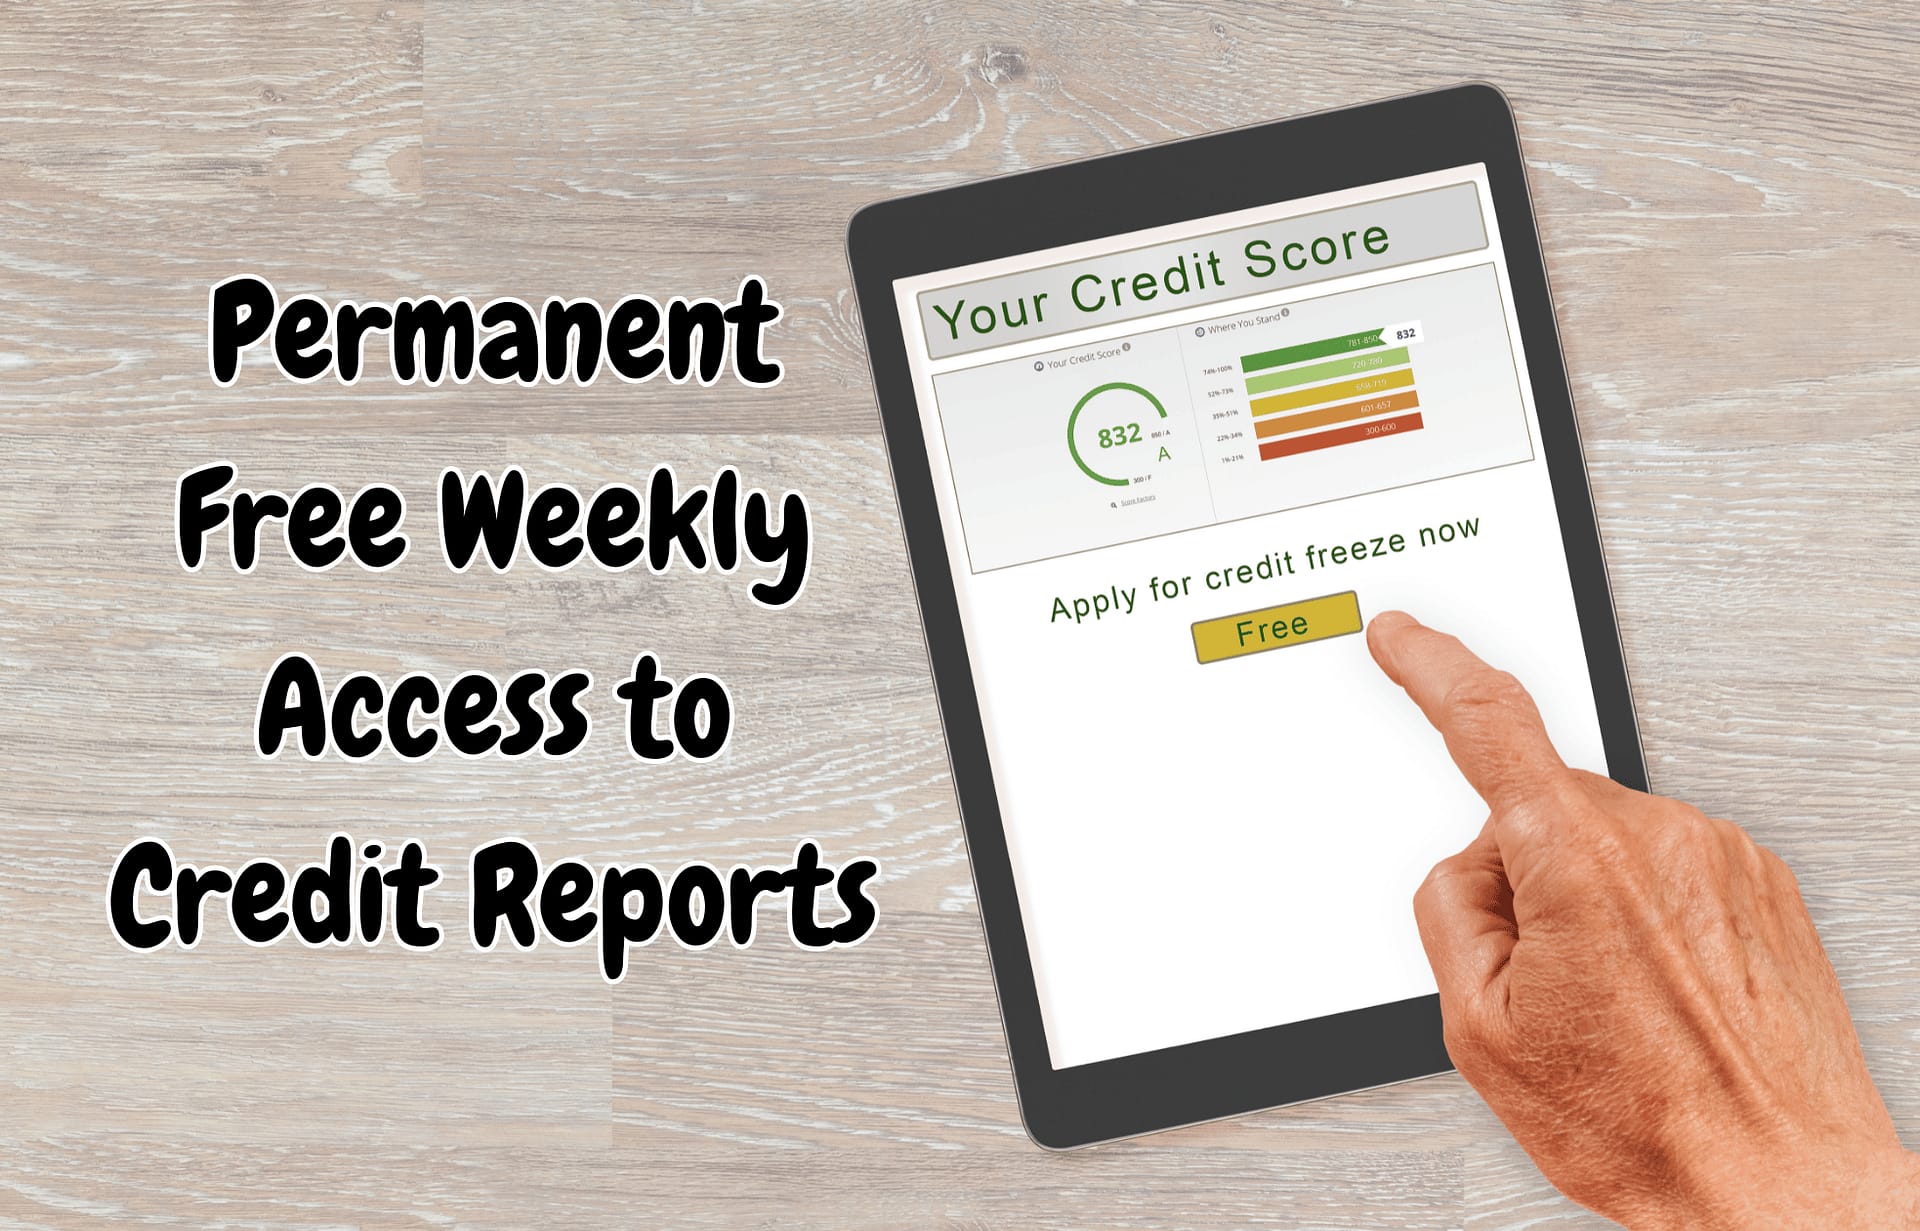 Permanent Free Weekly Access to Credit Reports for Consumers